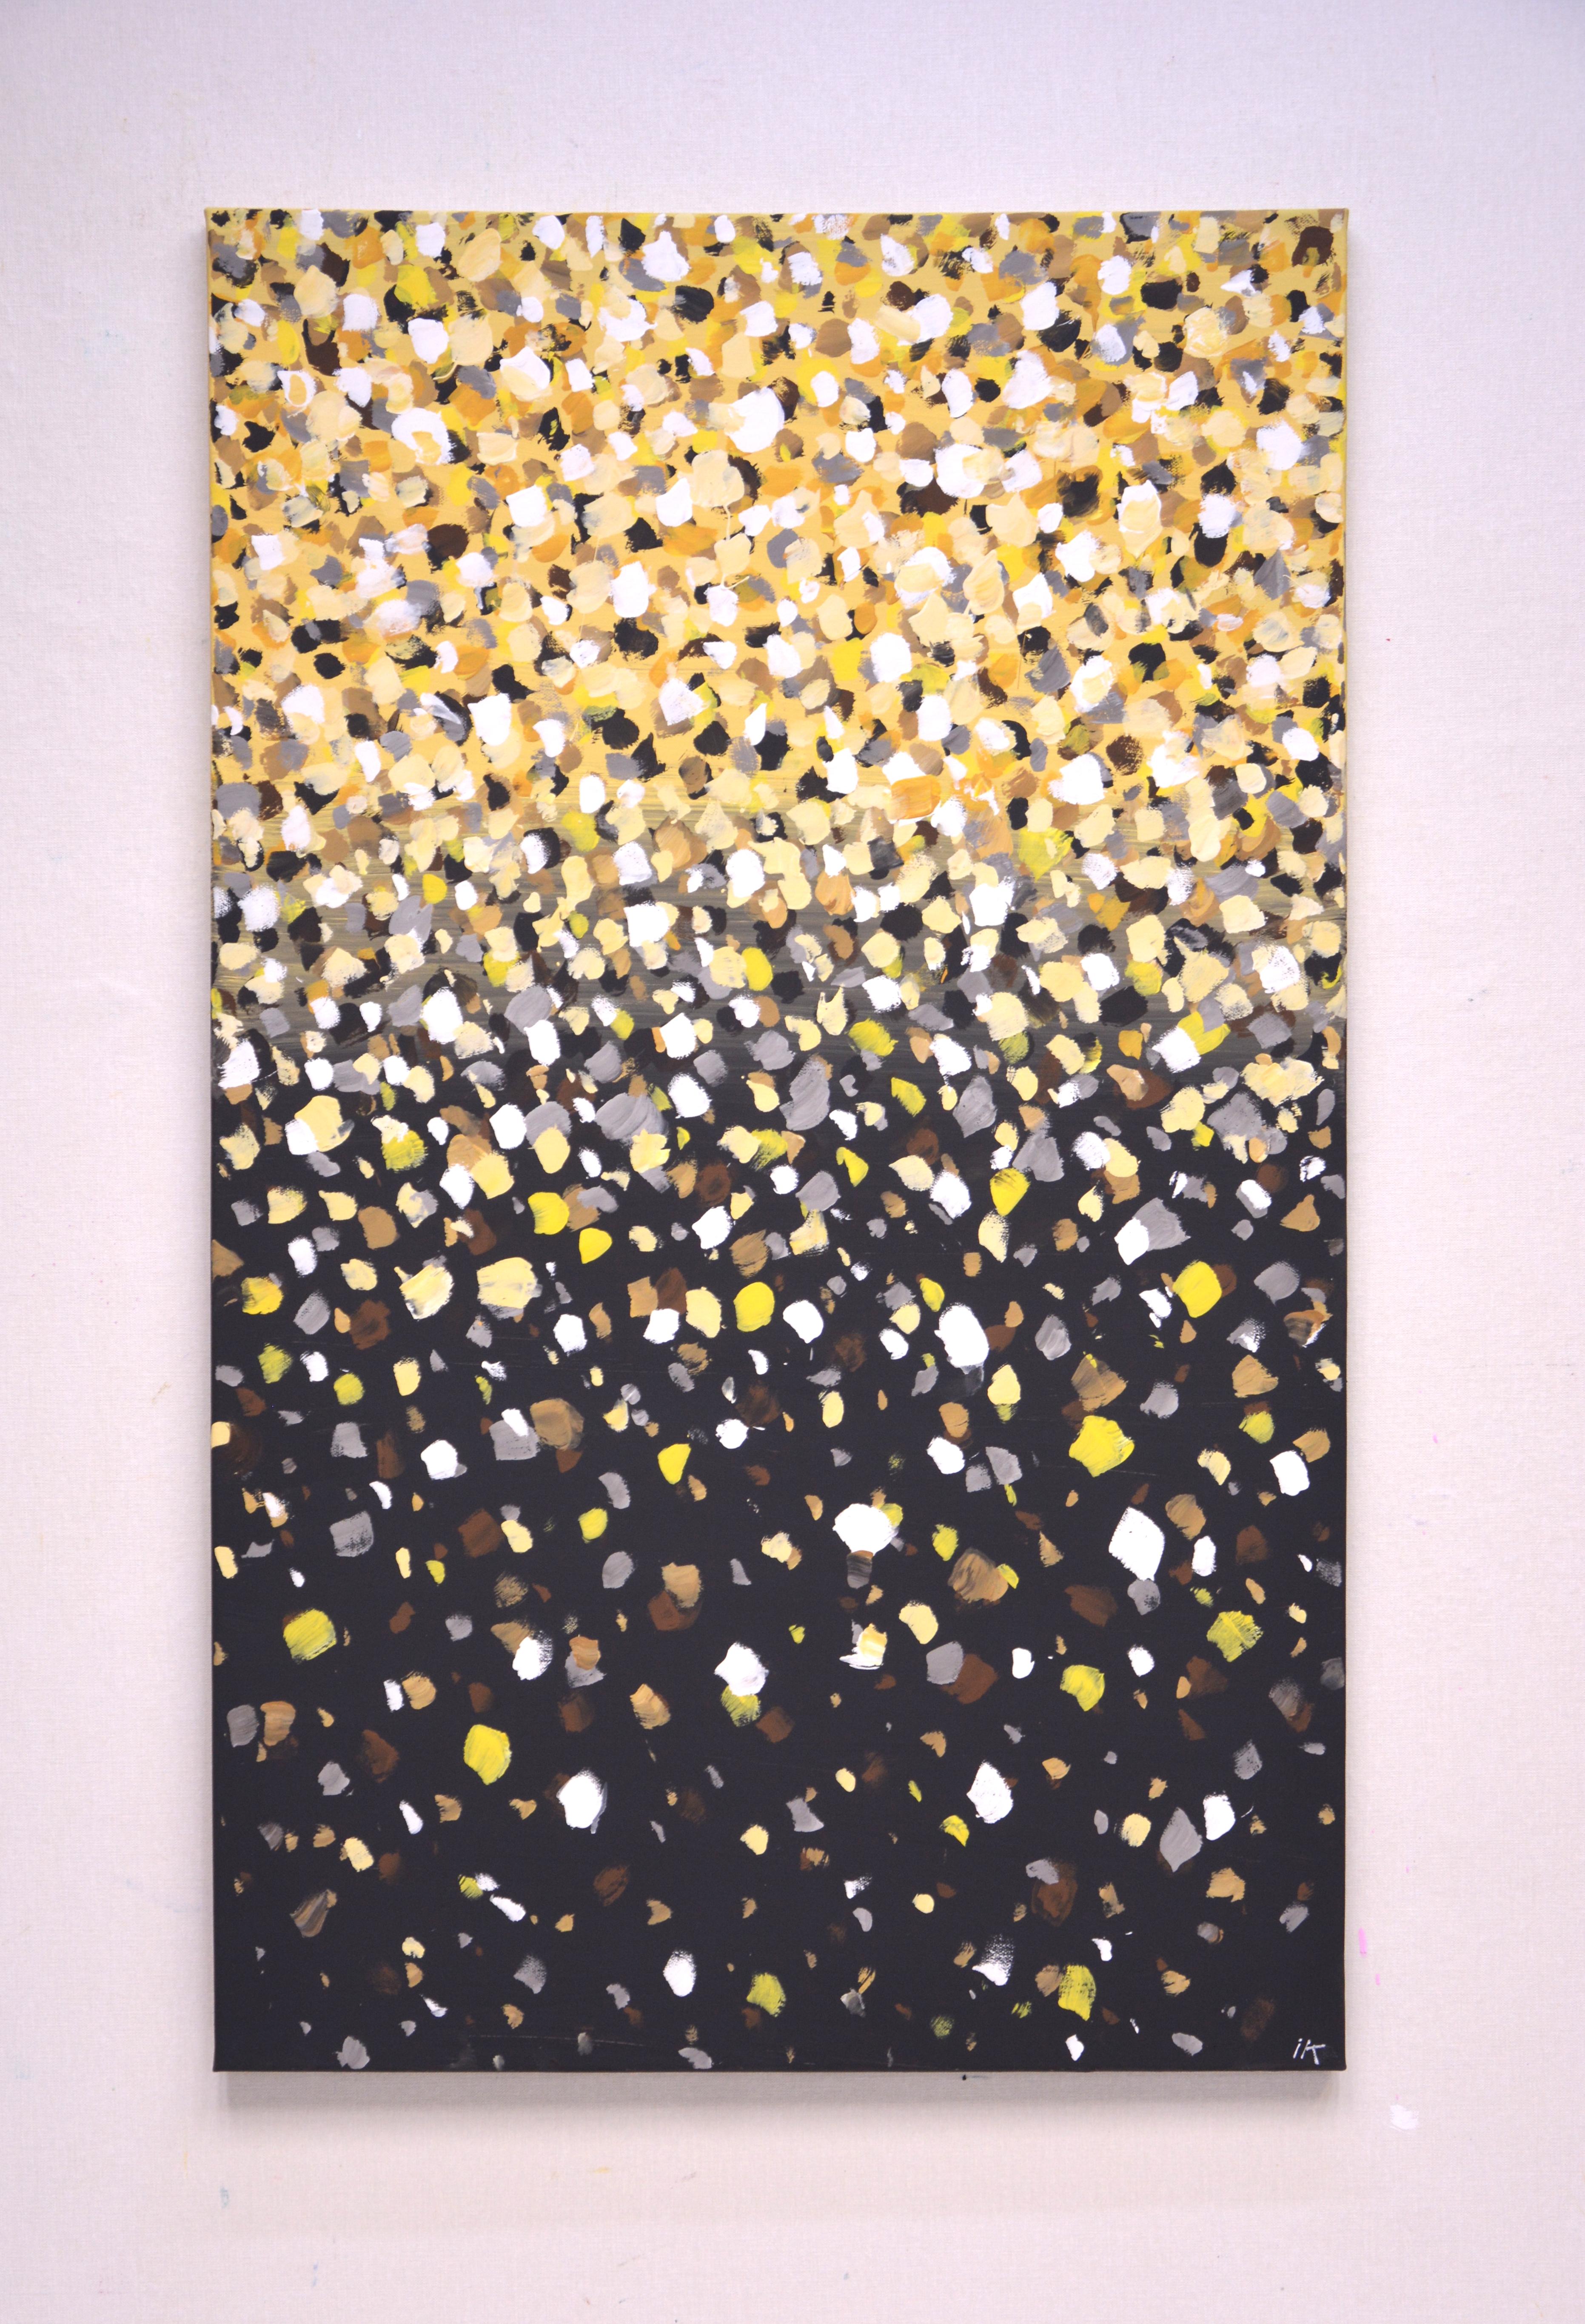 Poantillism. Glare. Modern expressive abstract painting that sparkles and shimmers! Colors are superimposed on each other and also correspond to different points. On a black background, there are many warm, ocher white, golden dots that fall from